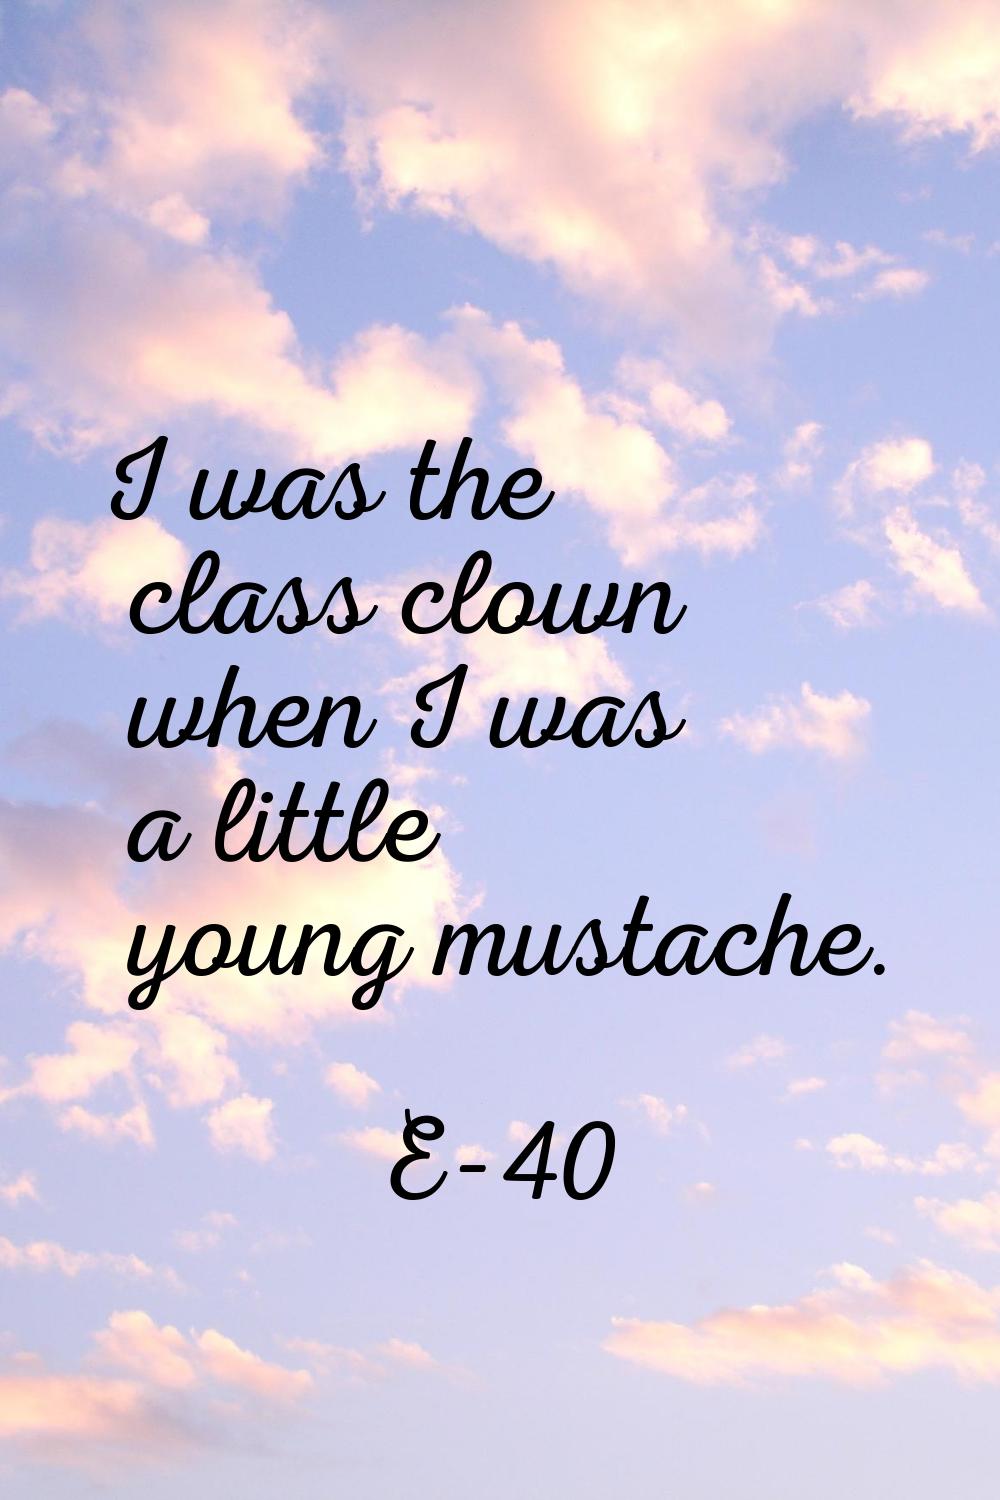 I was the class clown when I was a little young mustache.